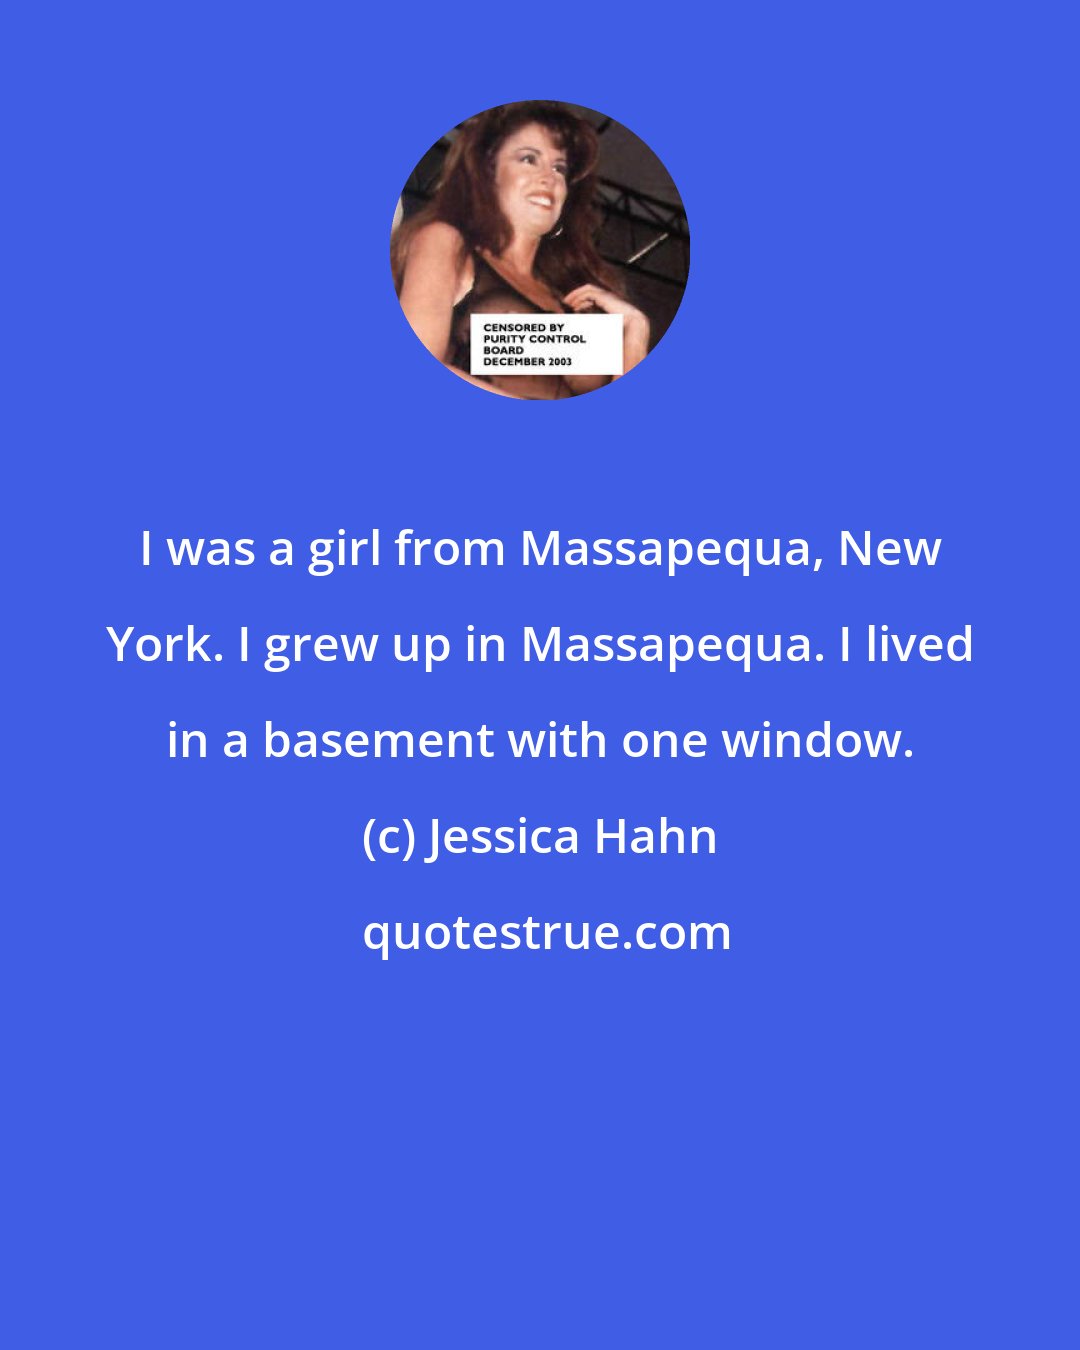 Jessica Hahn: I was a girl from Massapequa, New York. I grew up in Massapequa. I lived in a basement with one window.